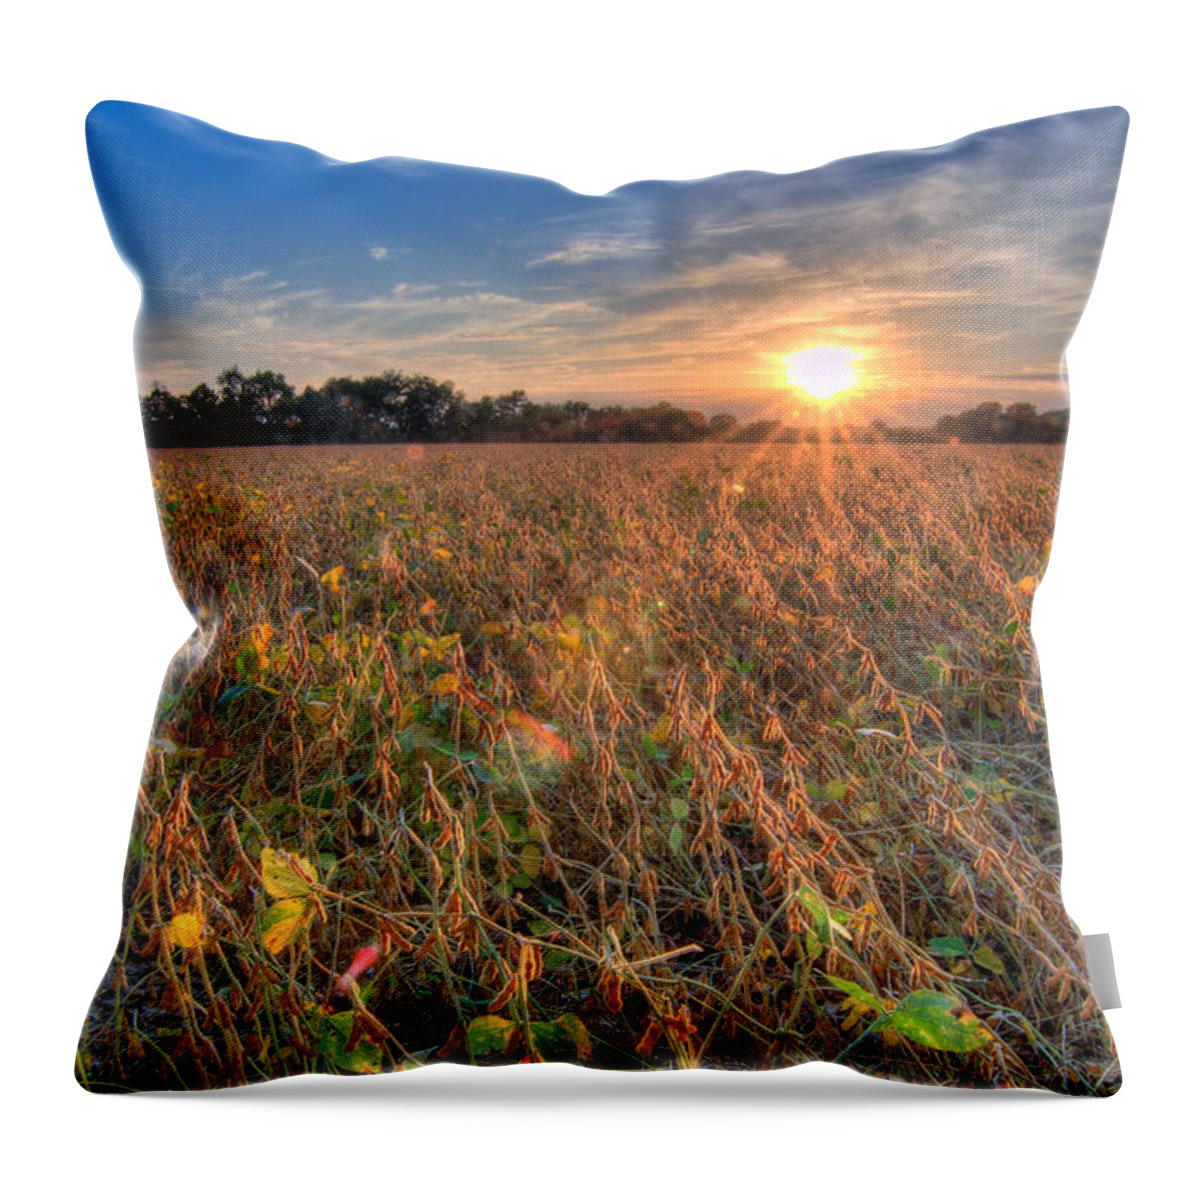 Sunset Throw Pillow featuring the photograph Sunset and Soybeans by Steve Stuller